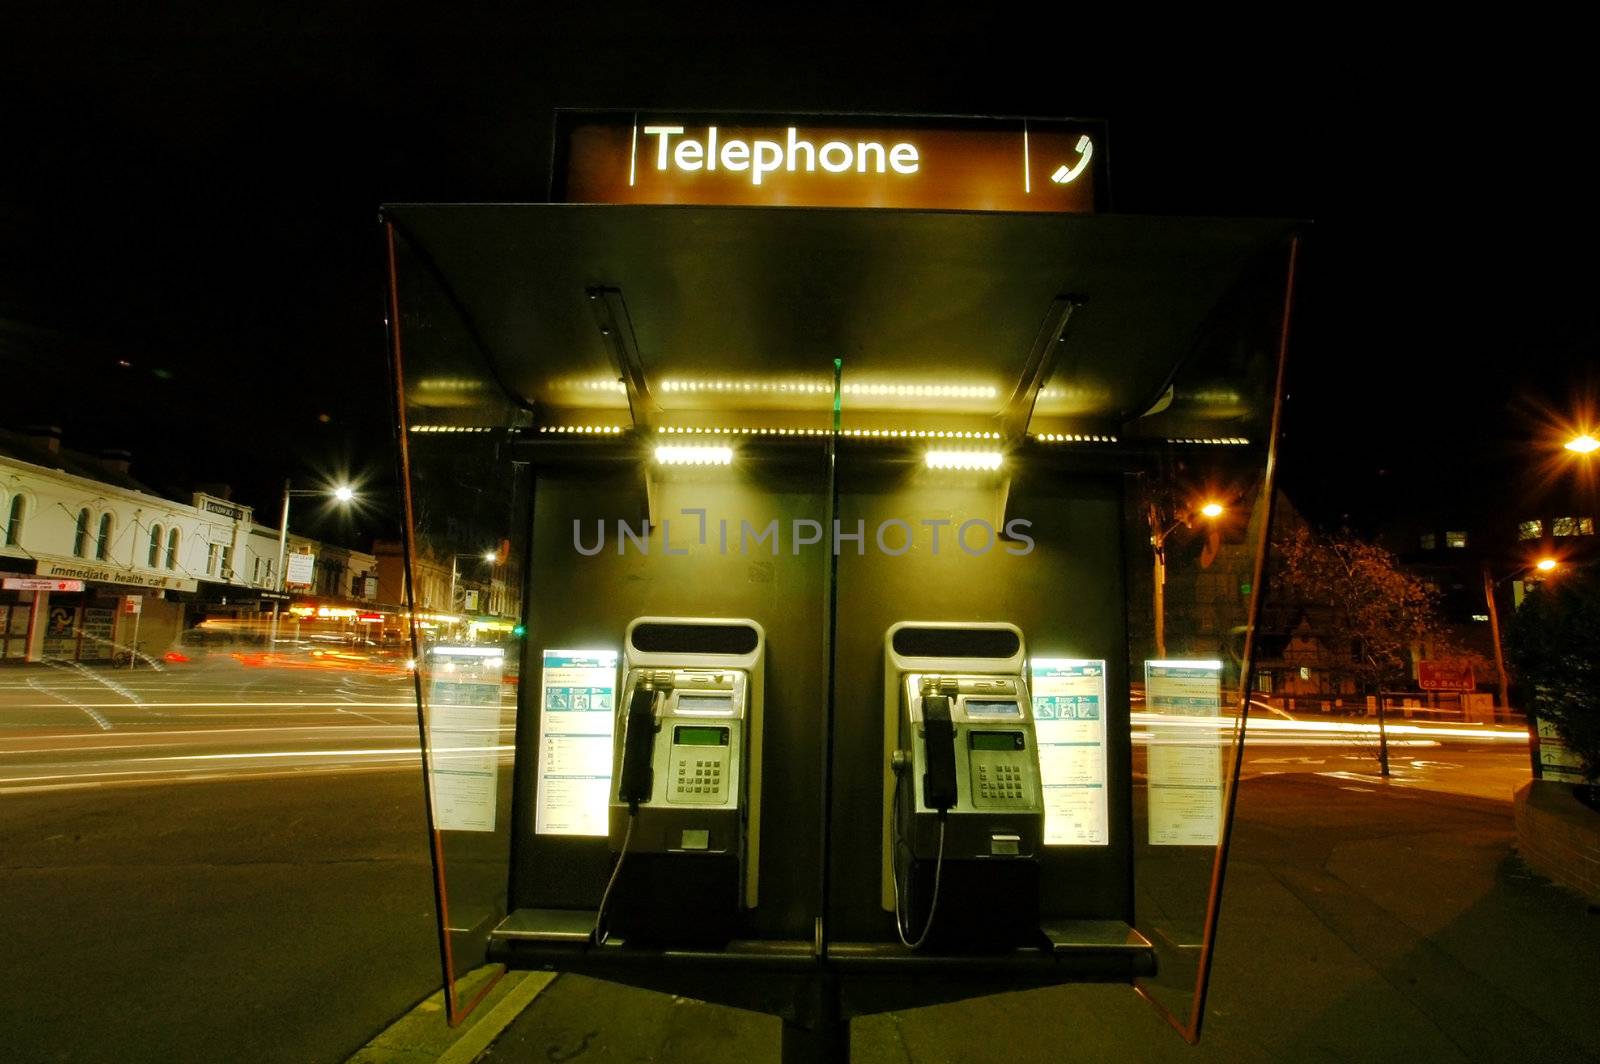 night scene, telephone booth, lights from moving cars